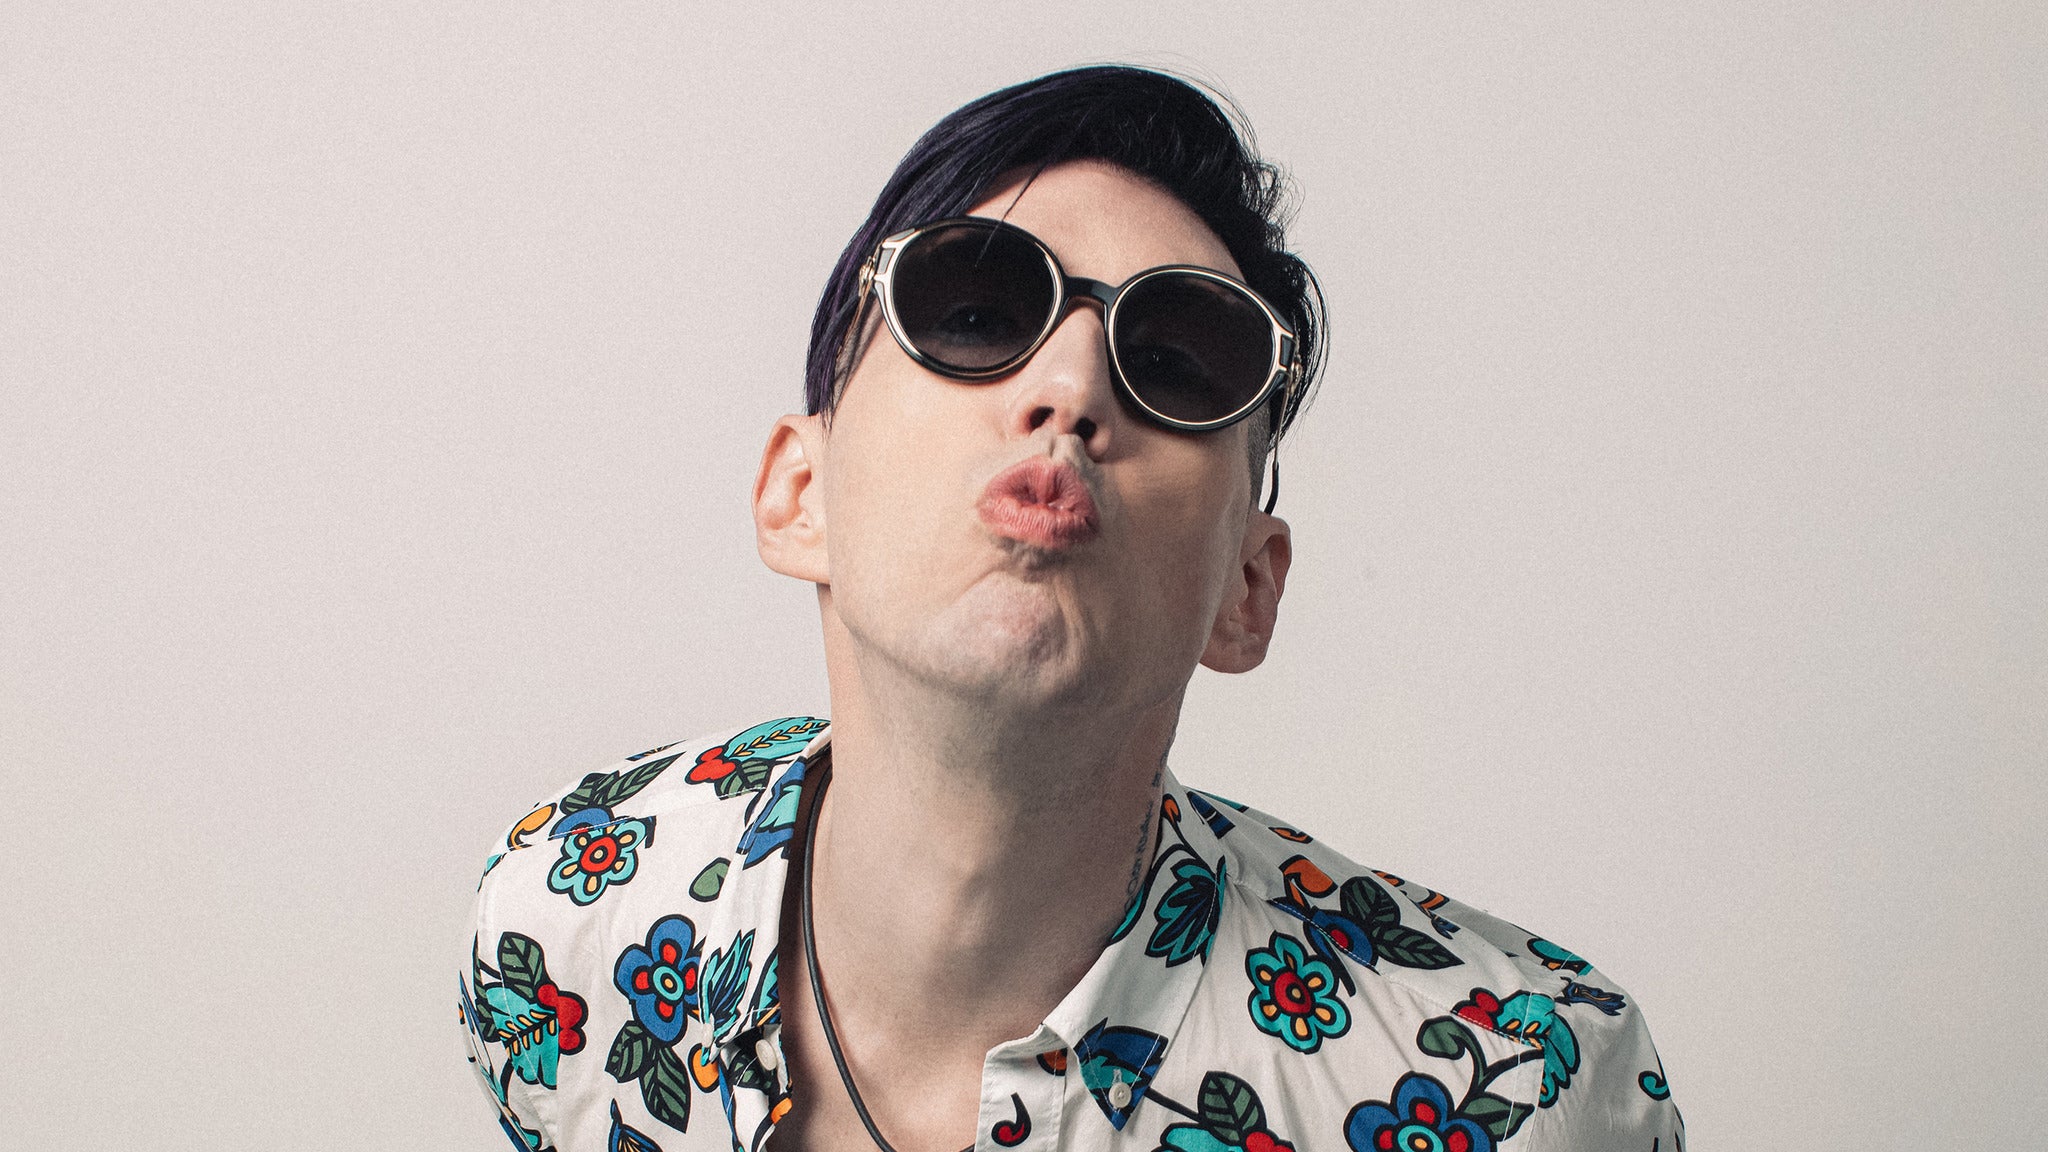 Josh Ramsay in Calgary promo photo for Official Platinum Onsale presale offer code